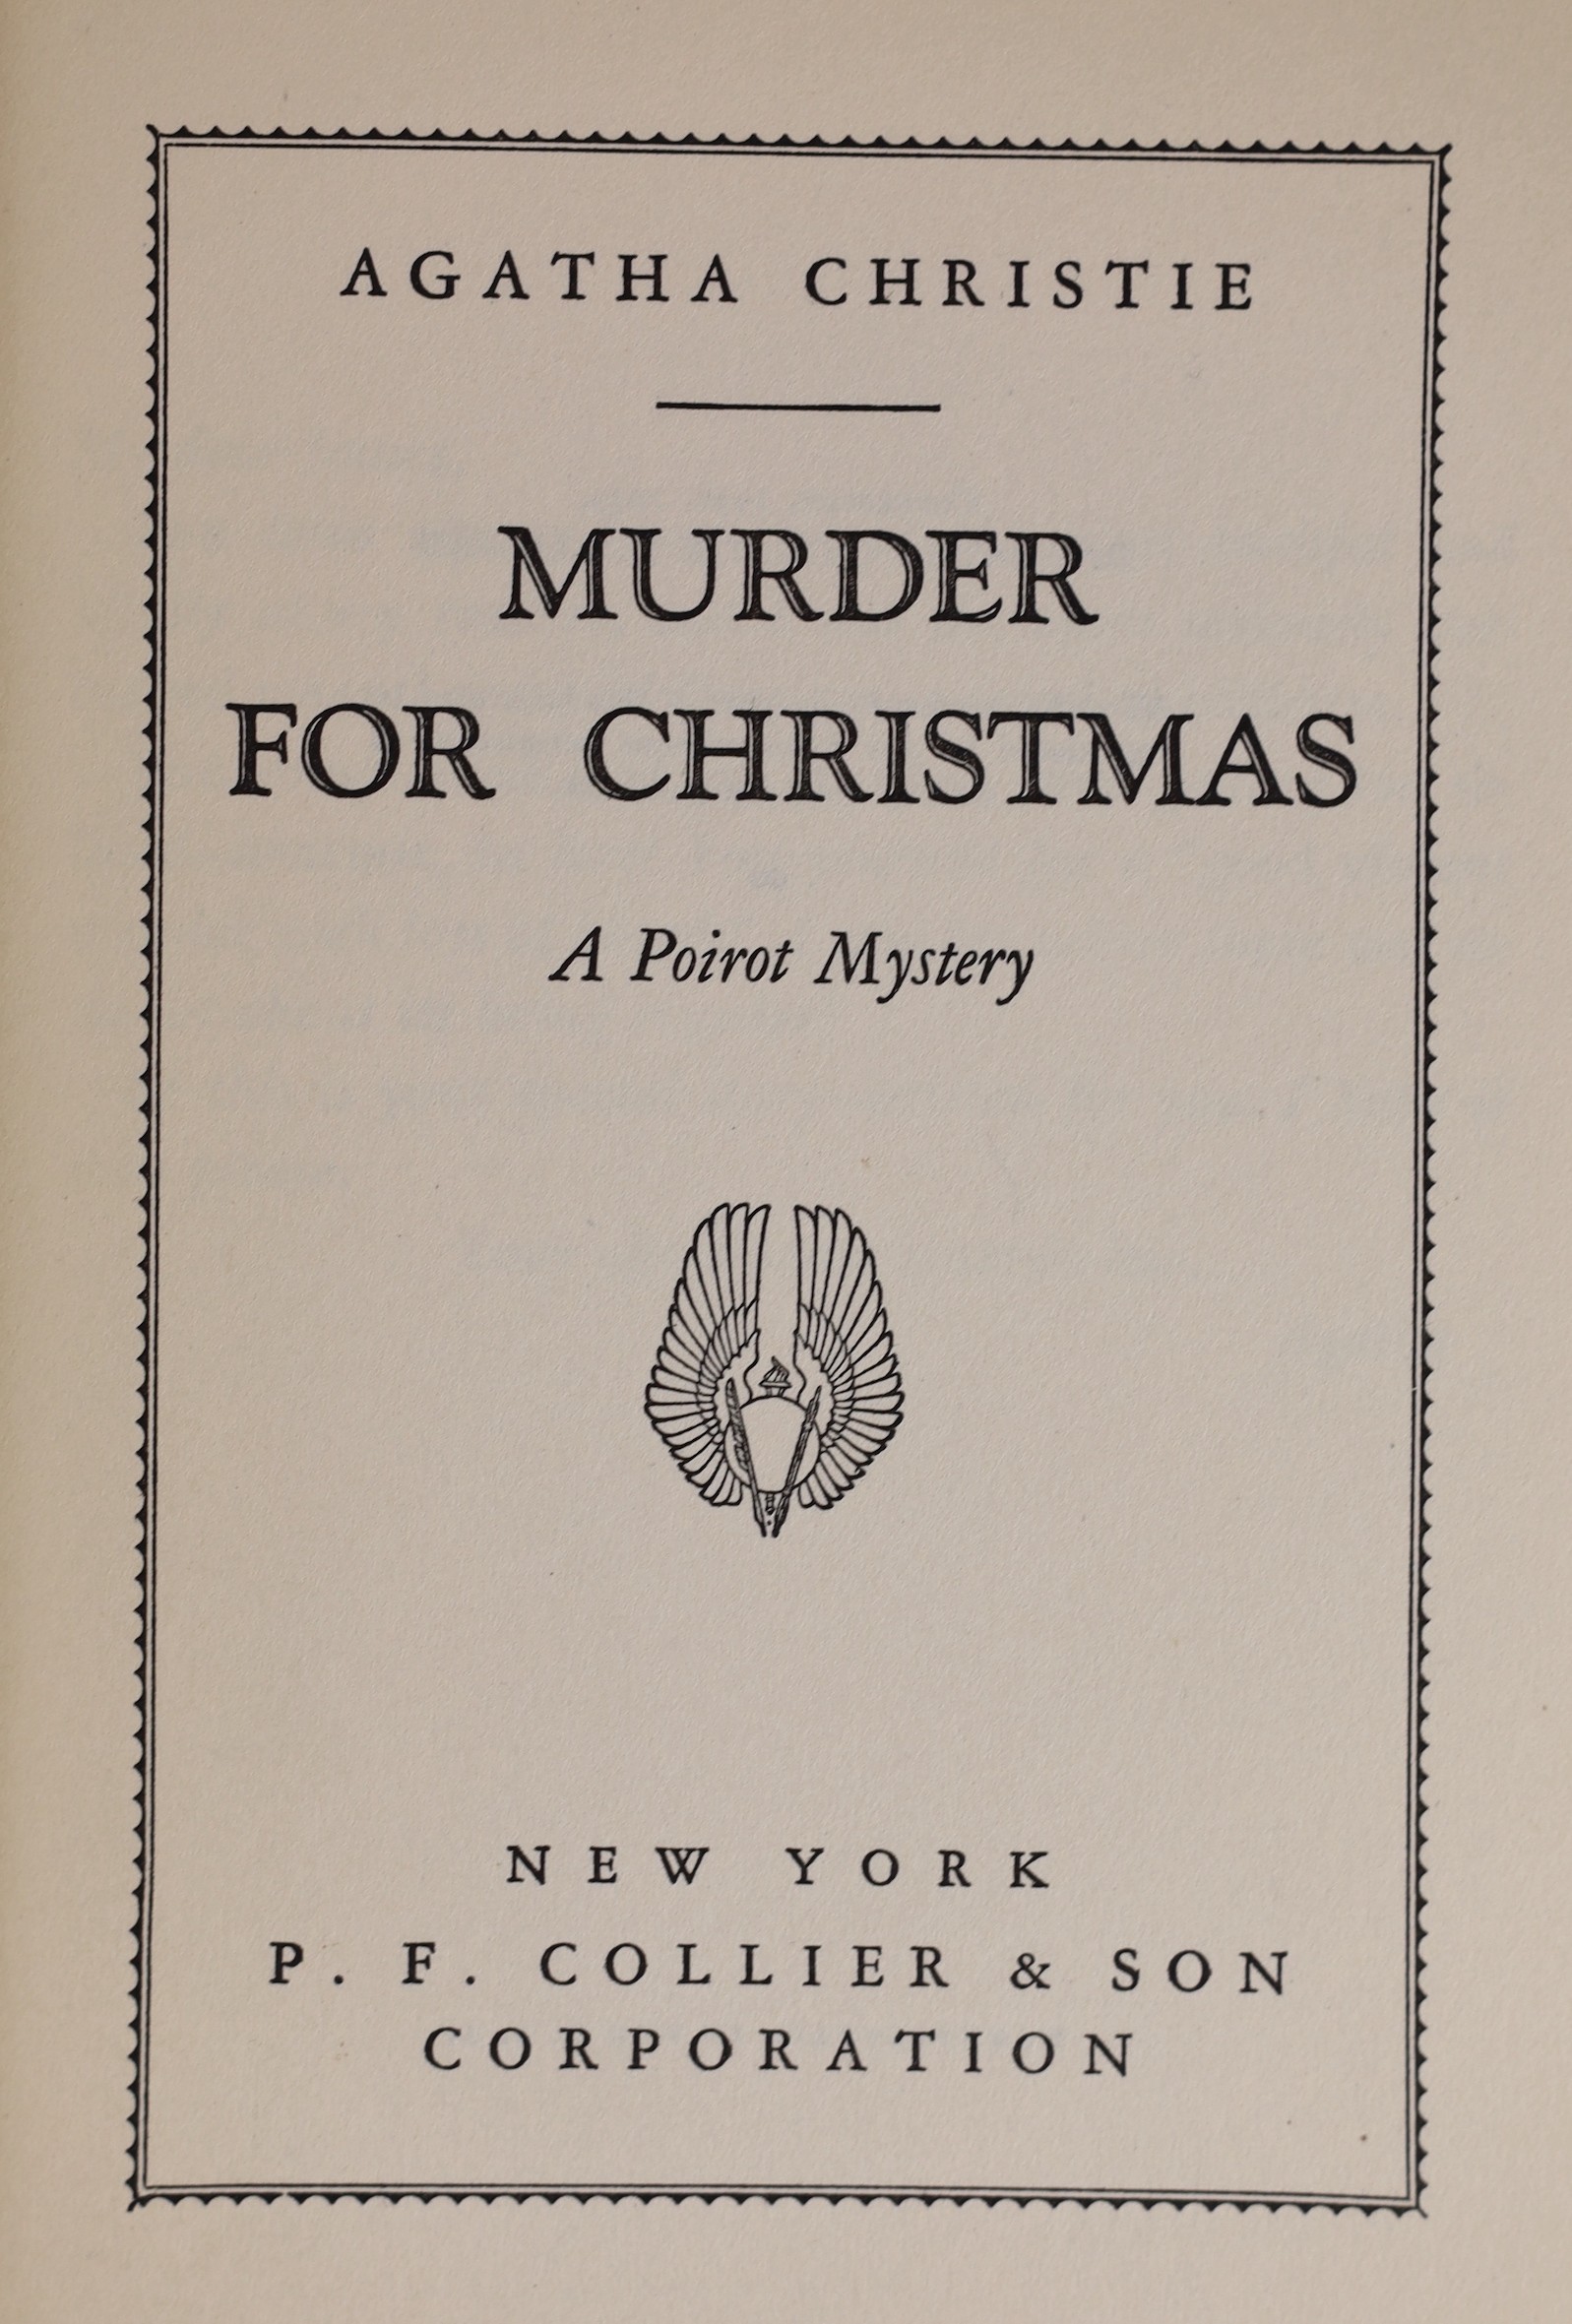 Christie, Agatha - 6 works (5 being Poirot mysteries), consisting Death on the Nile, 1937; Poirot Loses a Client, 1937; Murder for Christmas, 1939; Appointment with Death, 1938; Cards on the Table, 1936 and Easy to Kill,